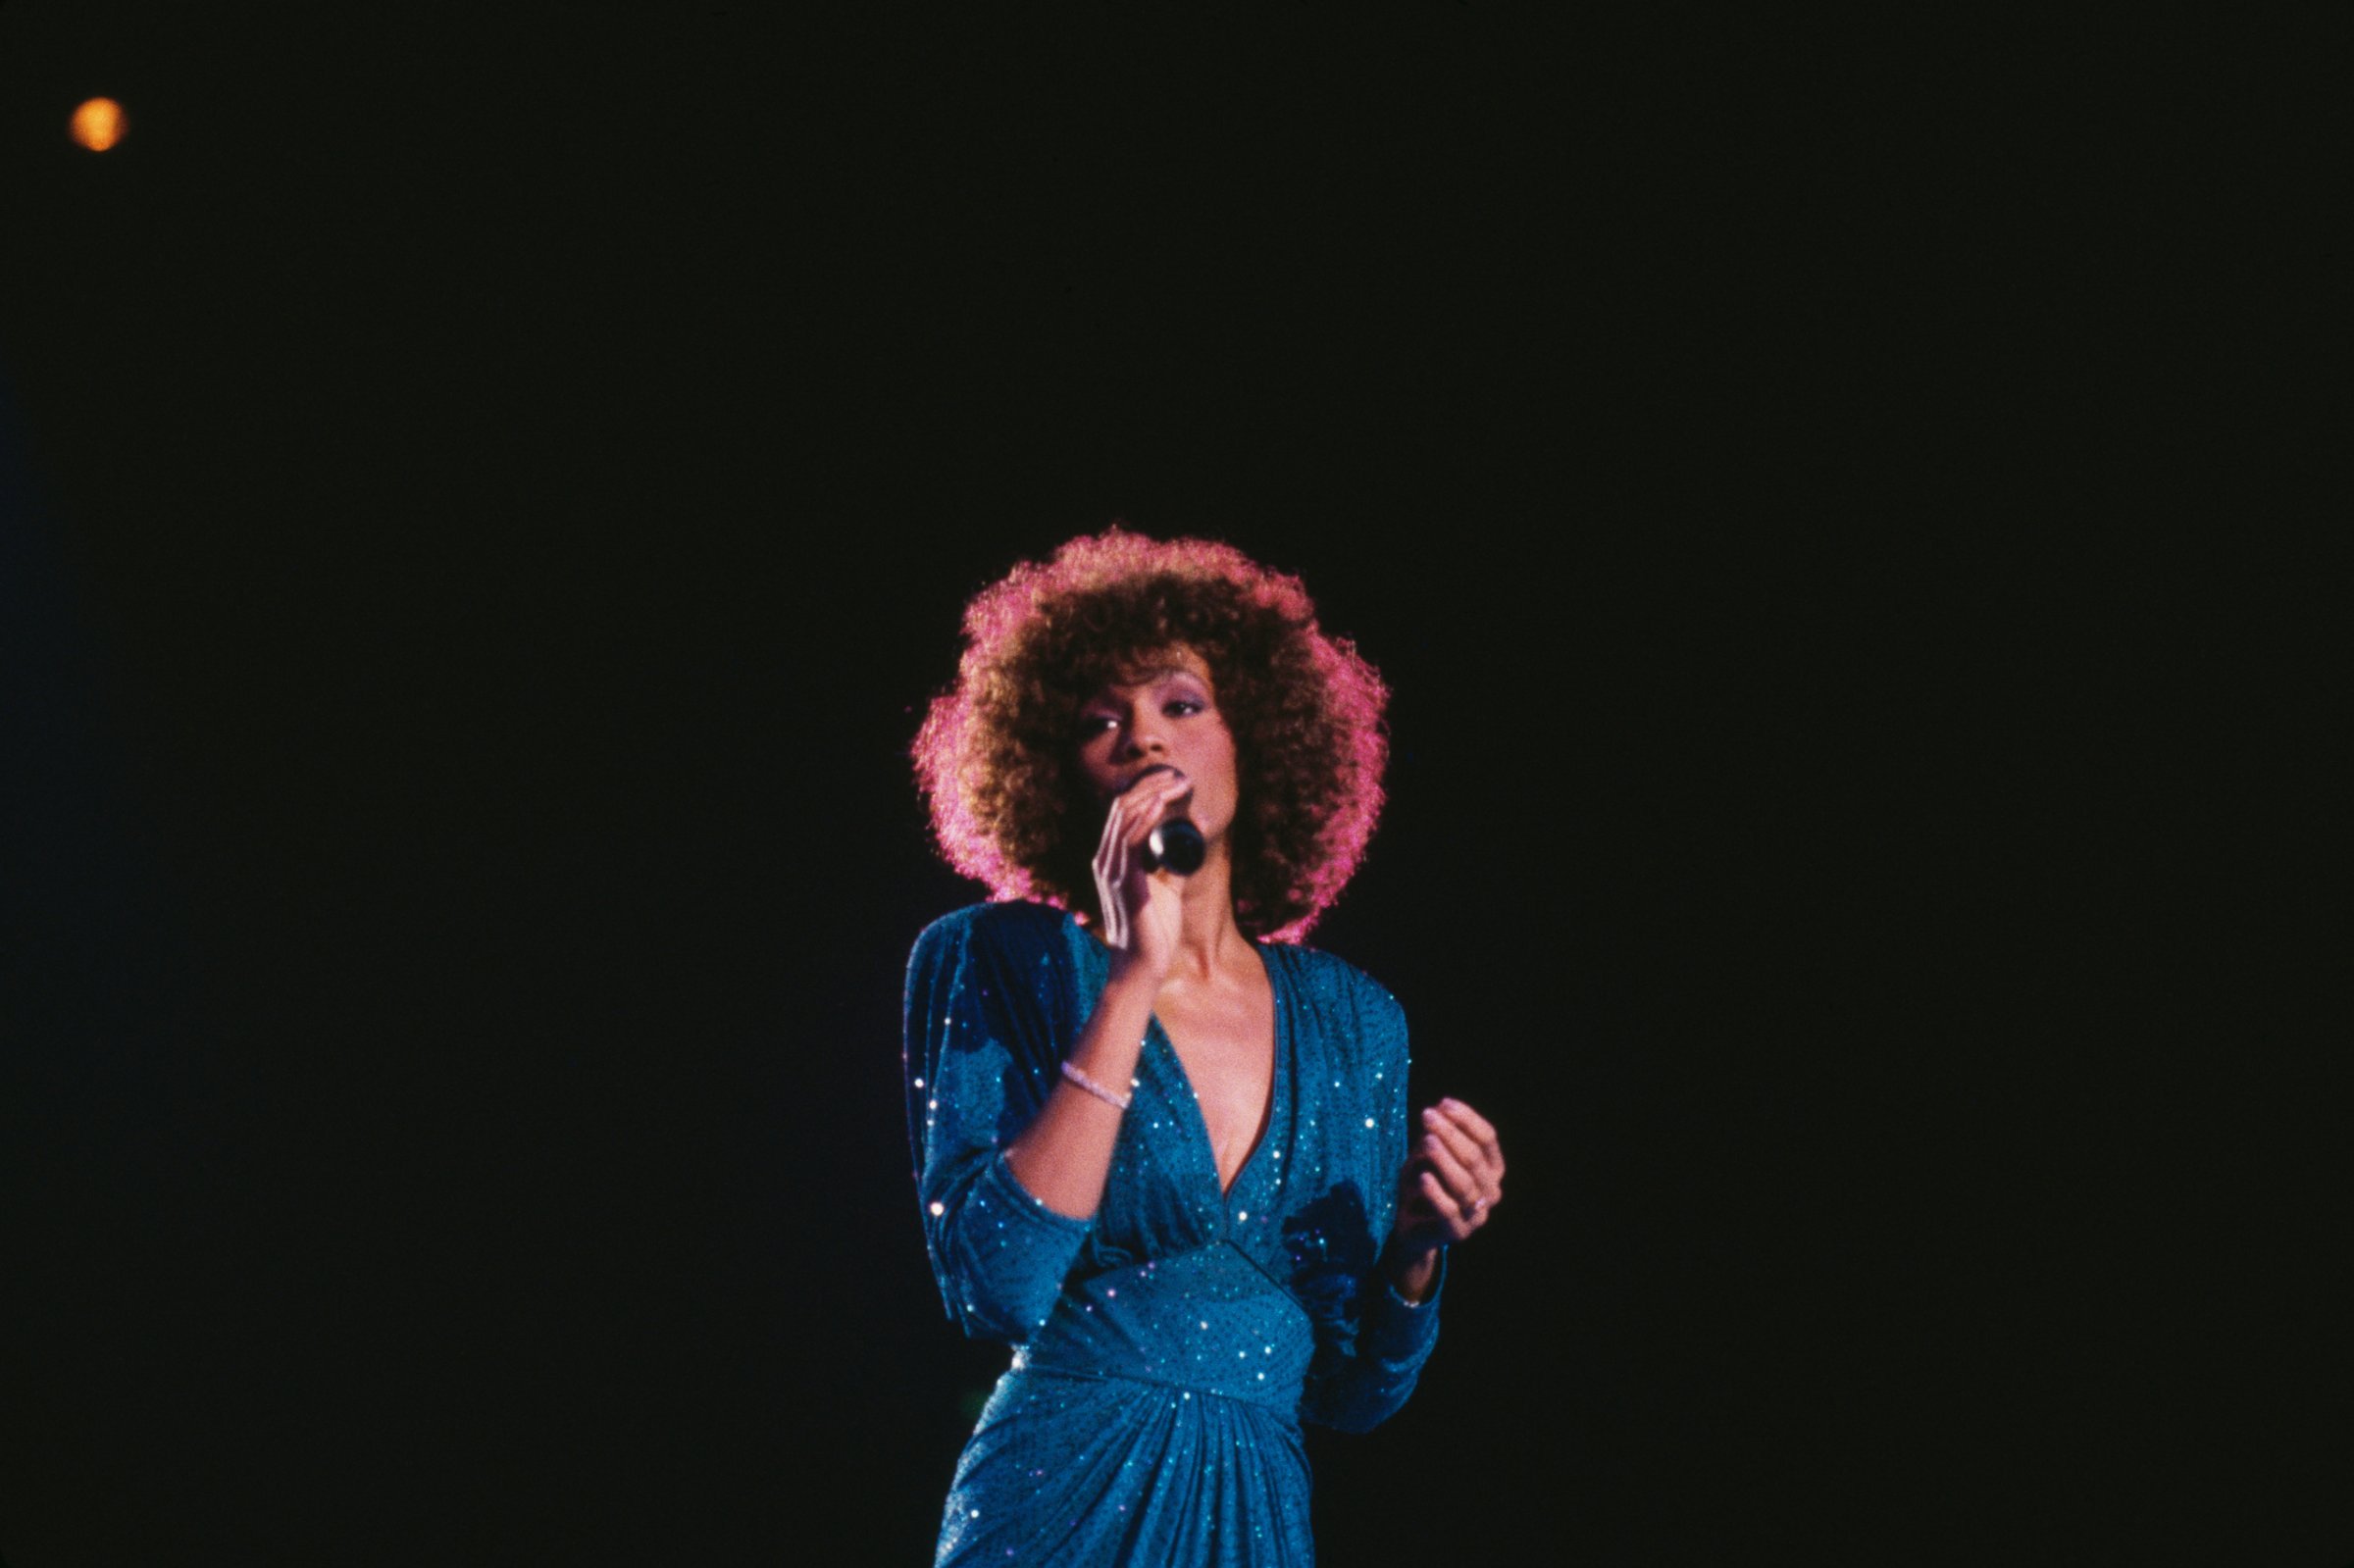 American singer Whitney Houston (1963 - 2012) in concert, circa 1986. (Photo by Dave Hogan/Getty Images)